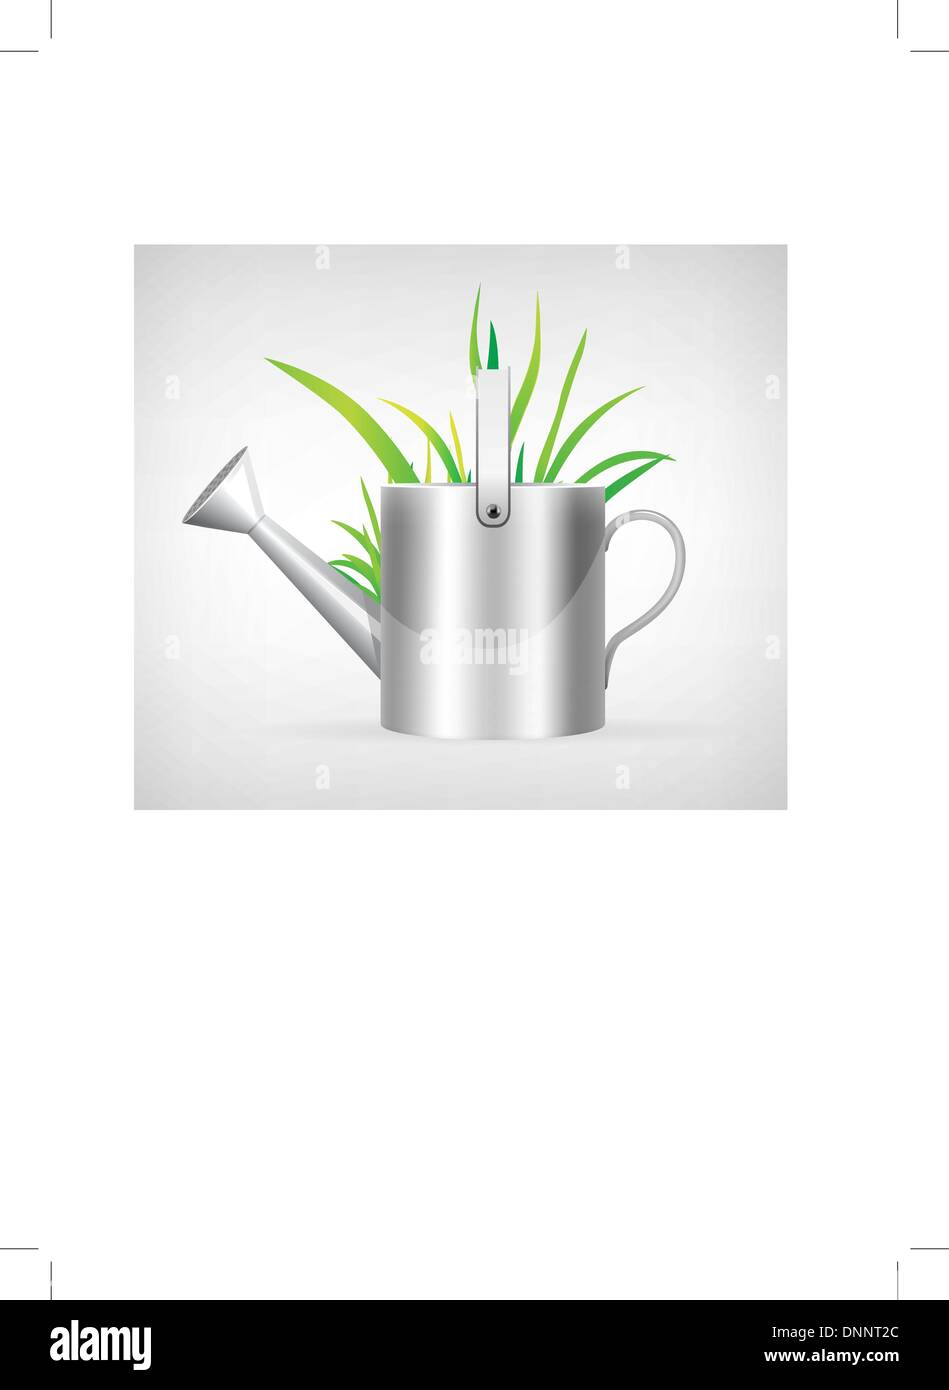 watering can and grass illustration isolated on white background Stock Vector